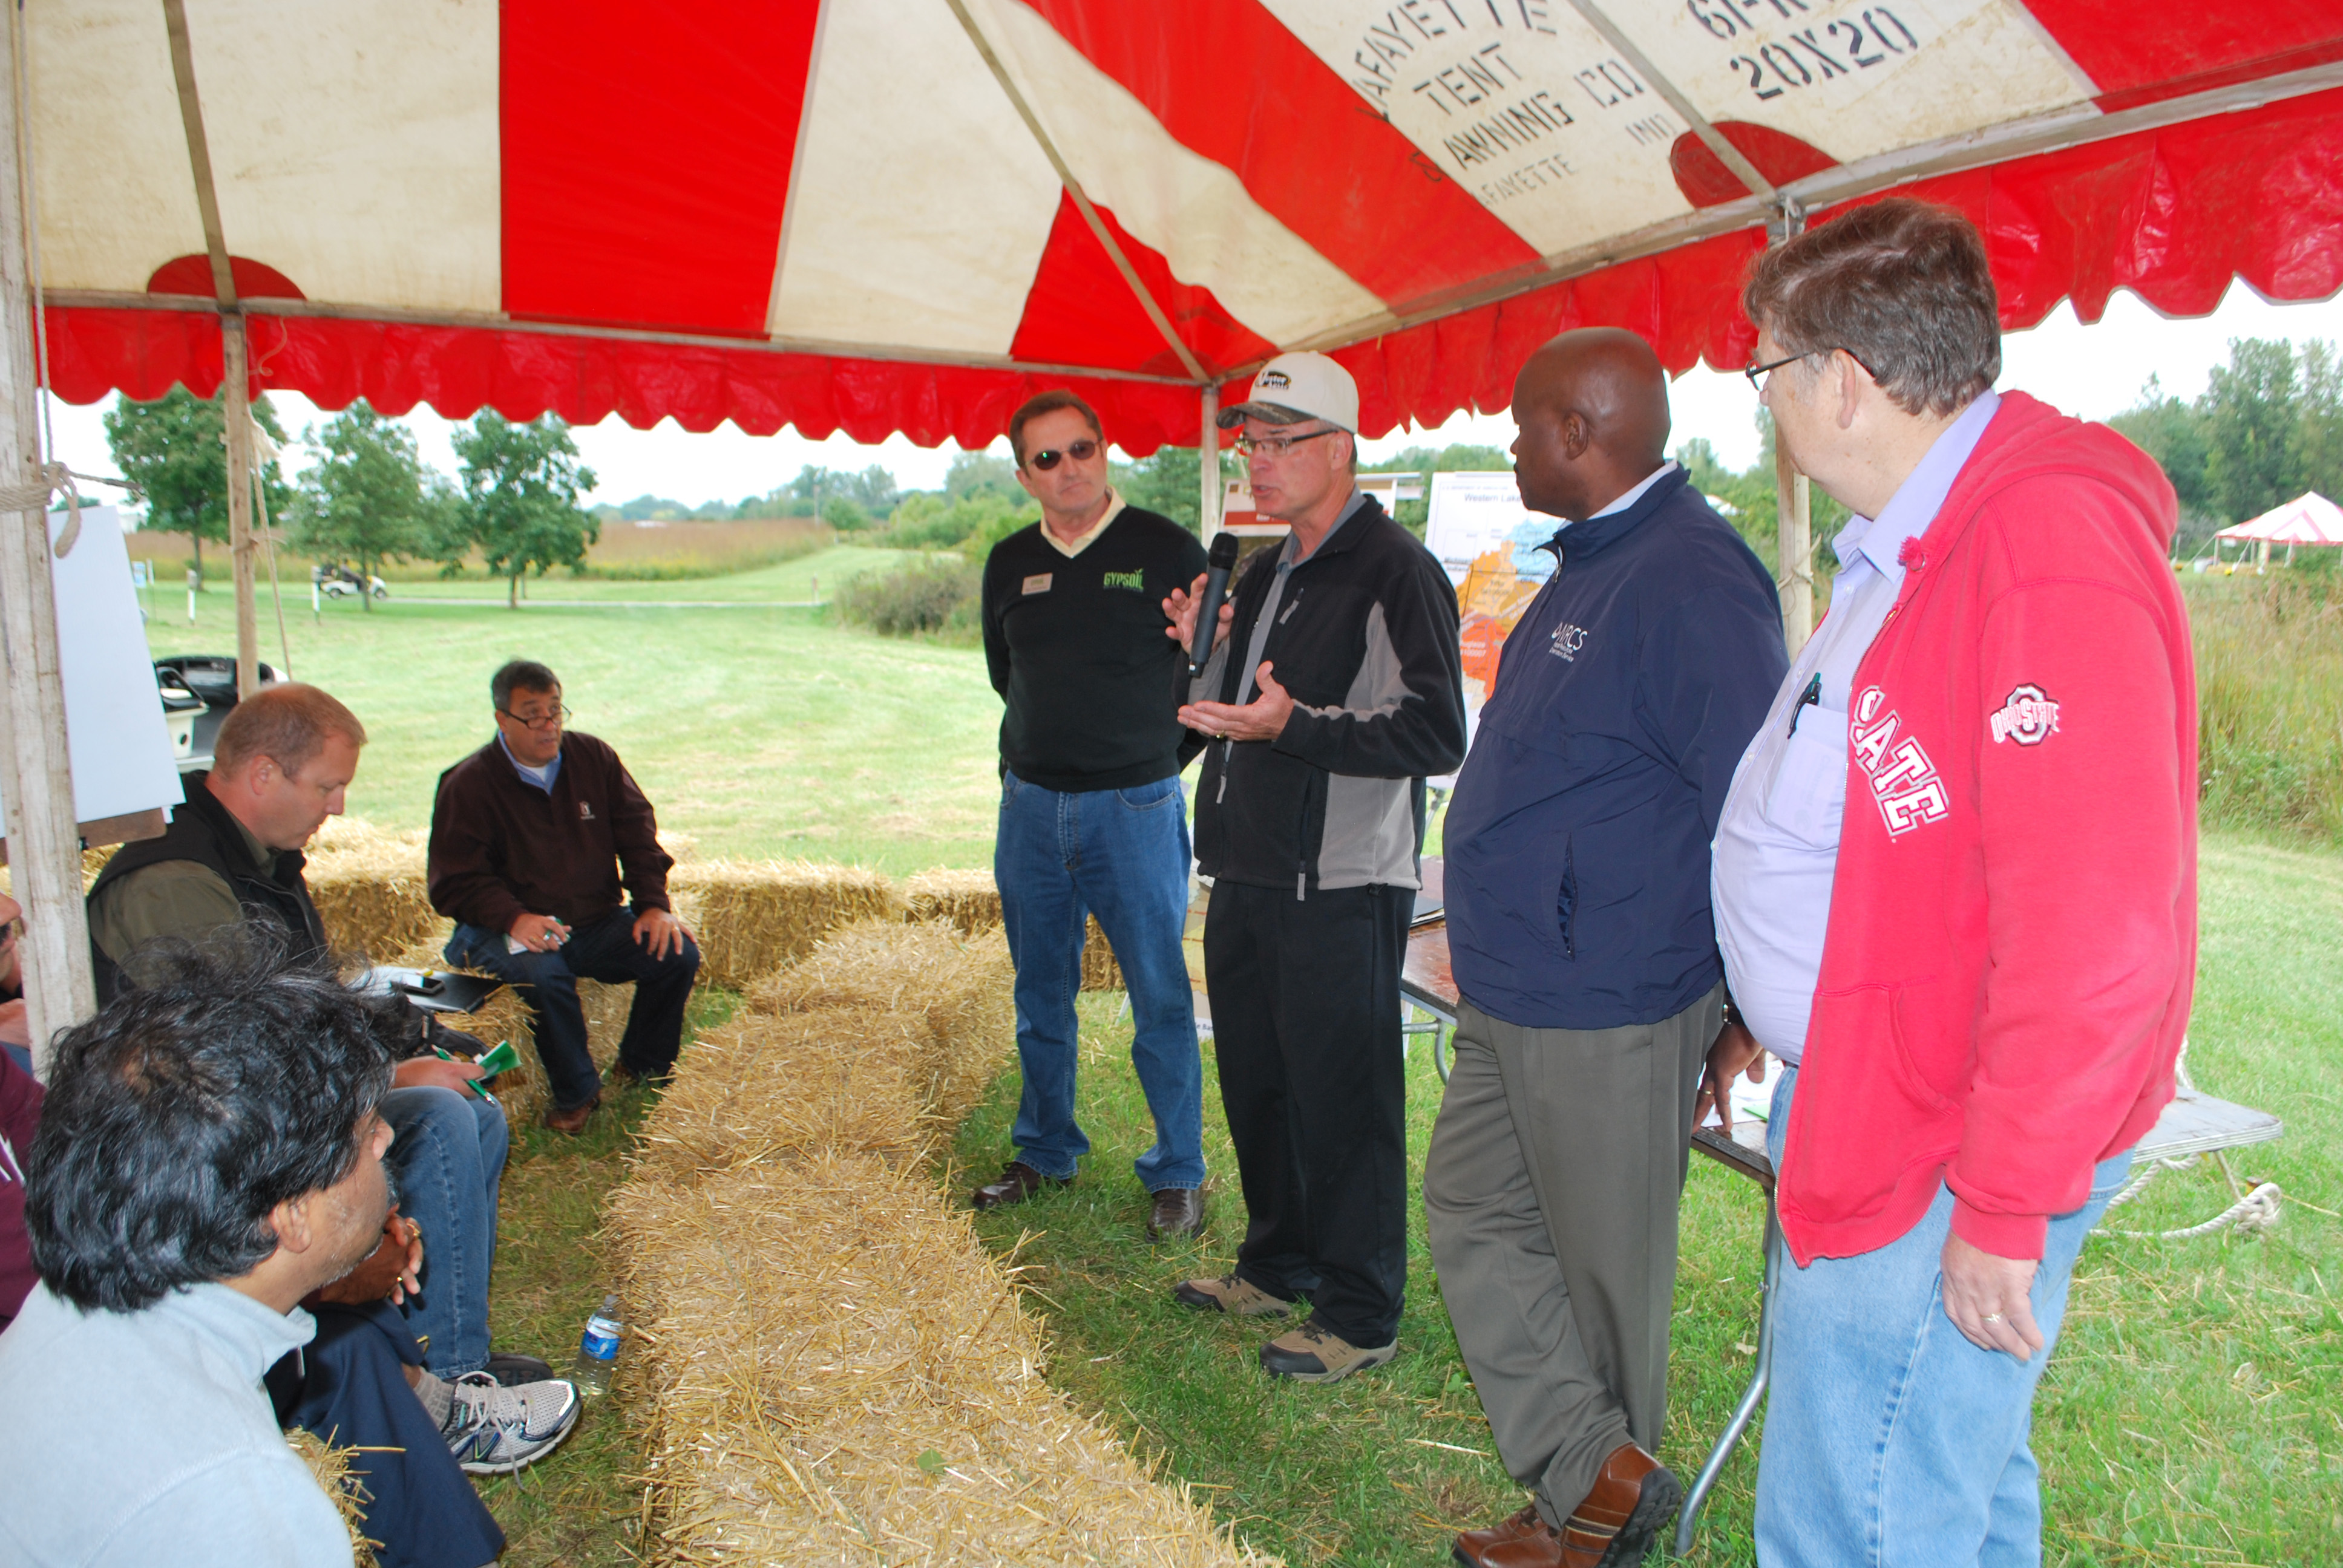 Joe Nester of Nester Ag, Bryan, OH, discusses gypsum's positive impact on reducing phosphorus runoff from farm fields at a press conference at The Ohio State University's (OSU) Farm Science Review in